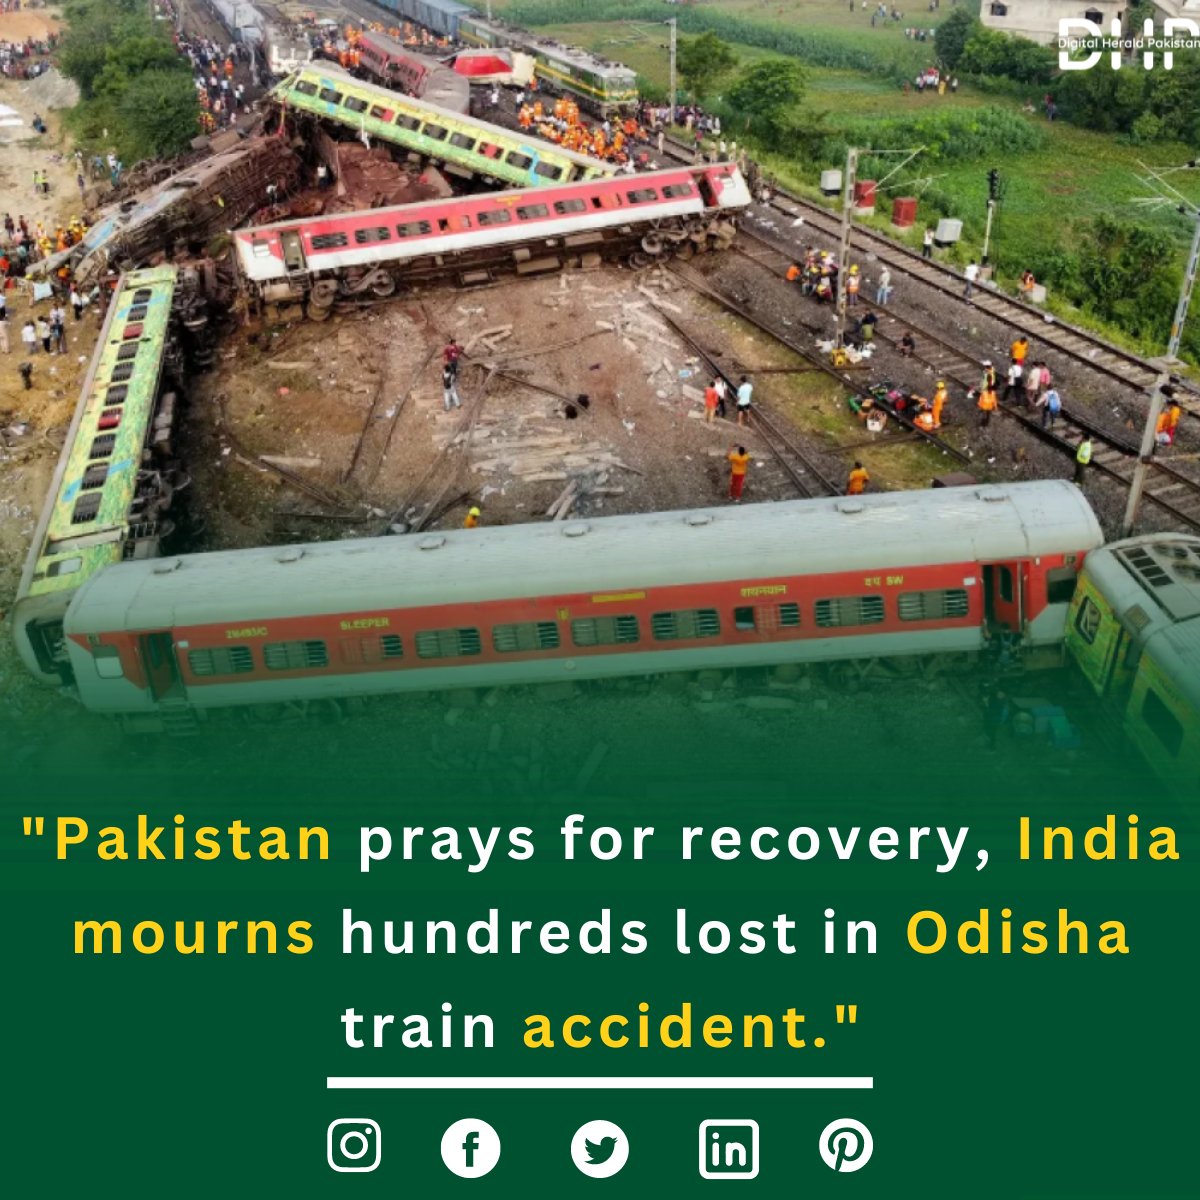 A three-train collision in Odisha, India, results in nearly 300 deaths and over 900 injuries, marking India's deadliest rail accident in over 20 years. Pakistan expresses condolences to the affected families while India observes a day of state mourning.
#indiamourns #Odisha